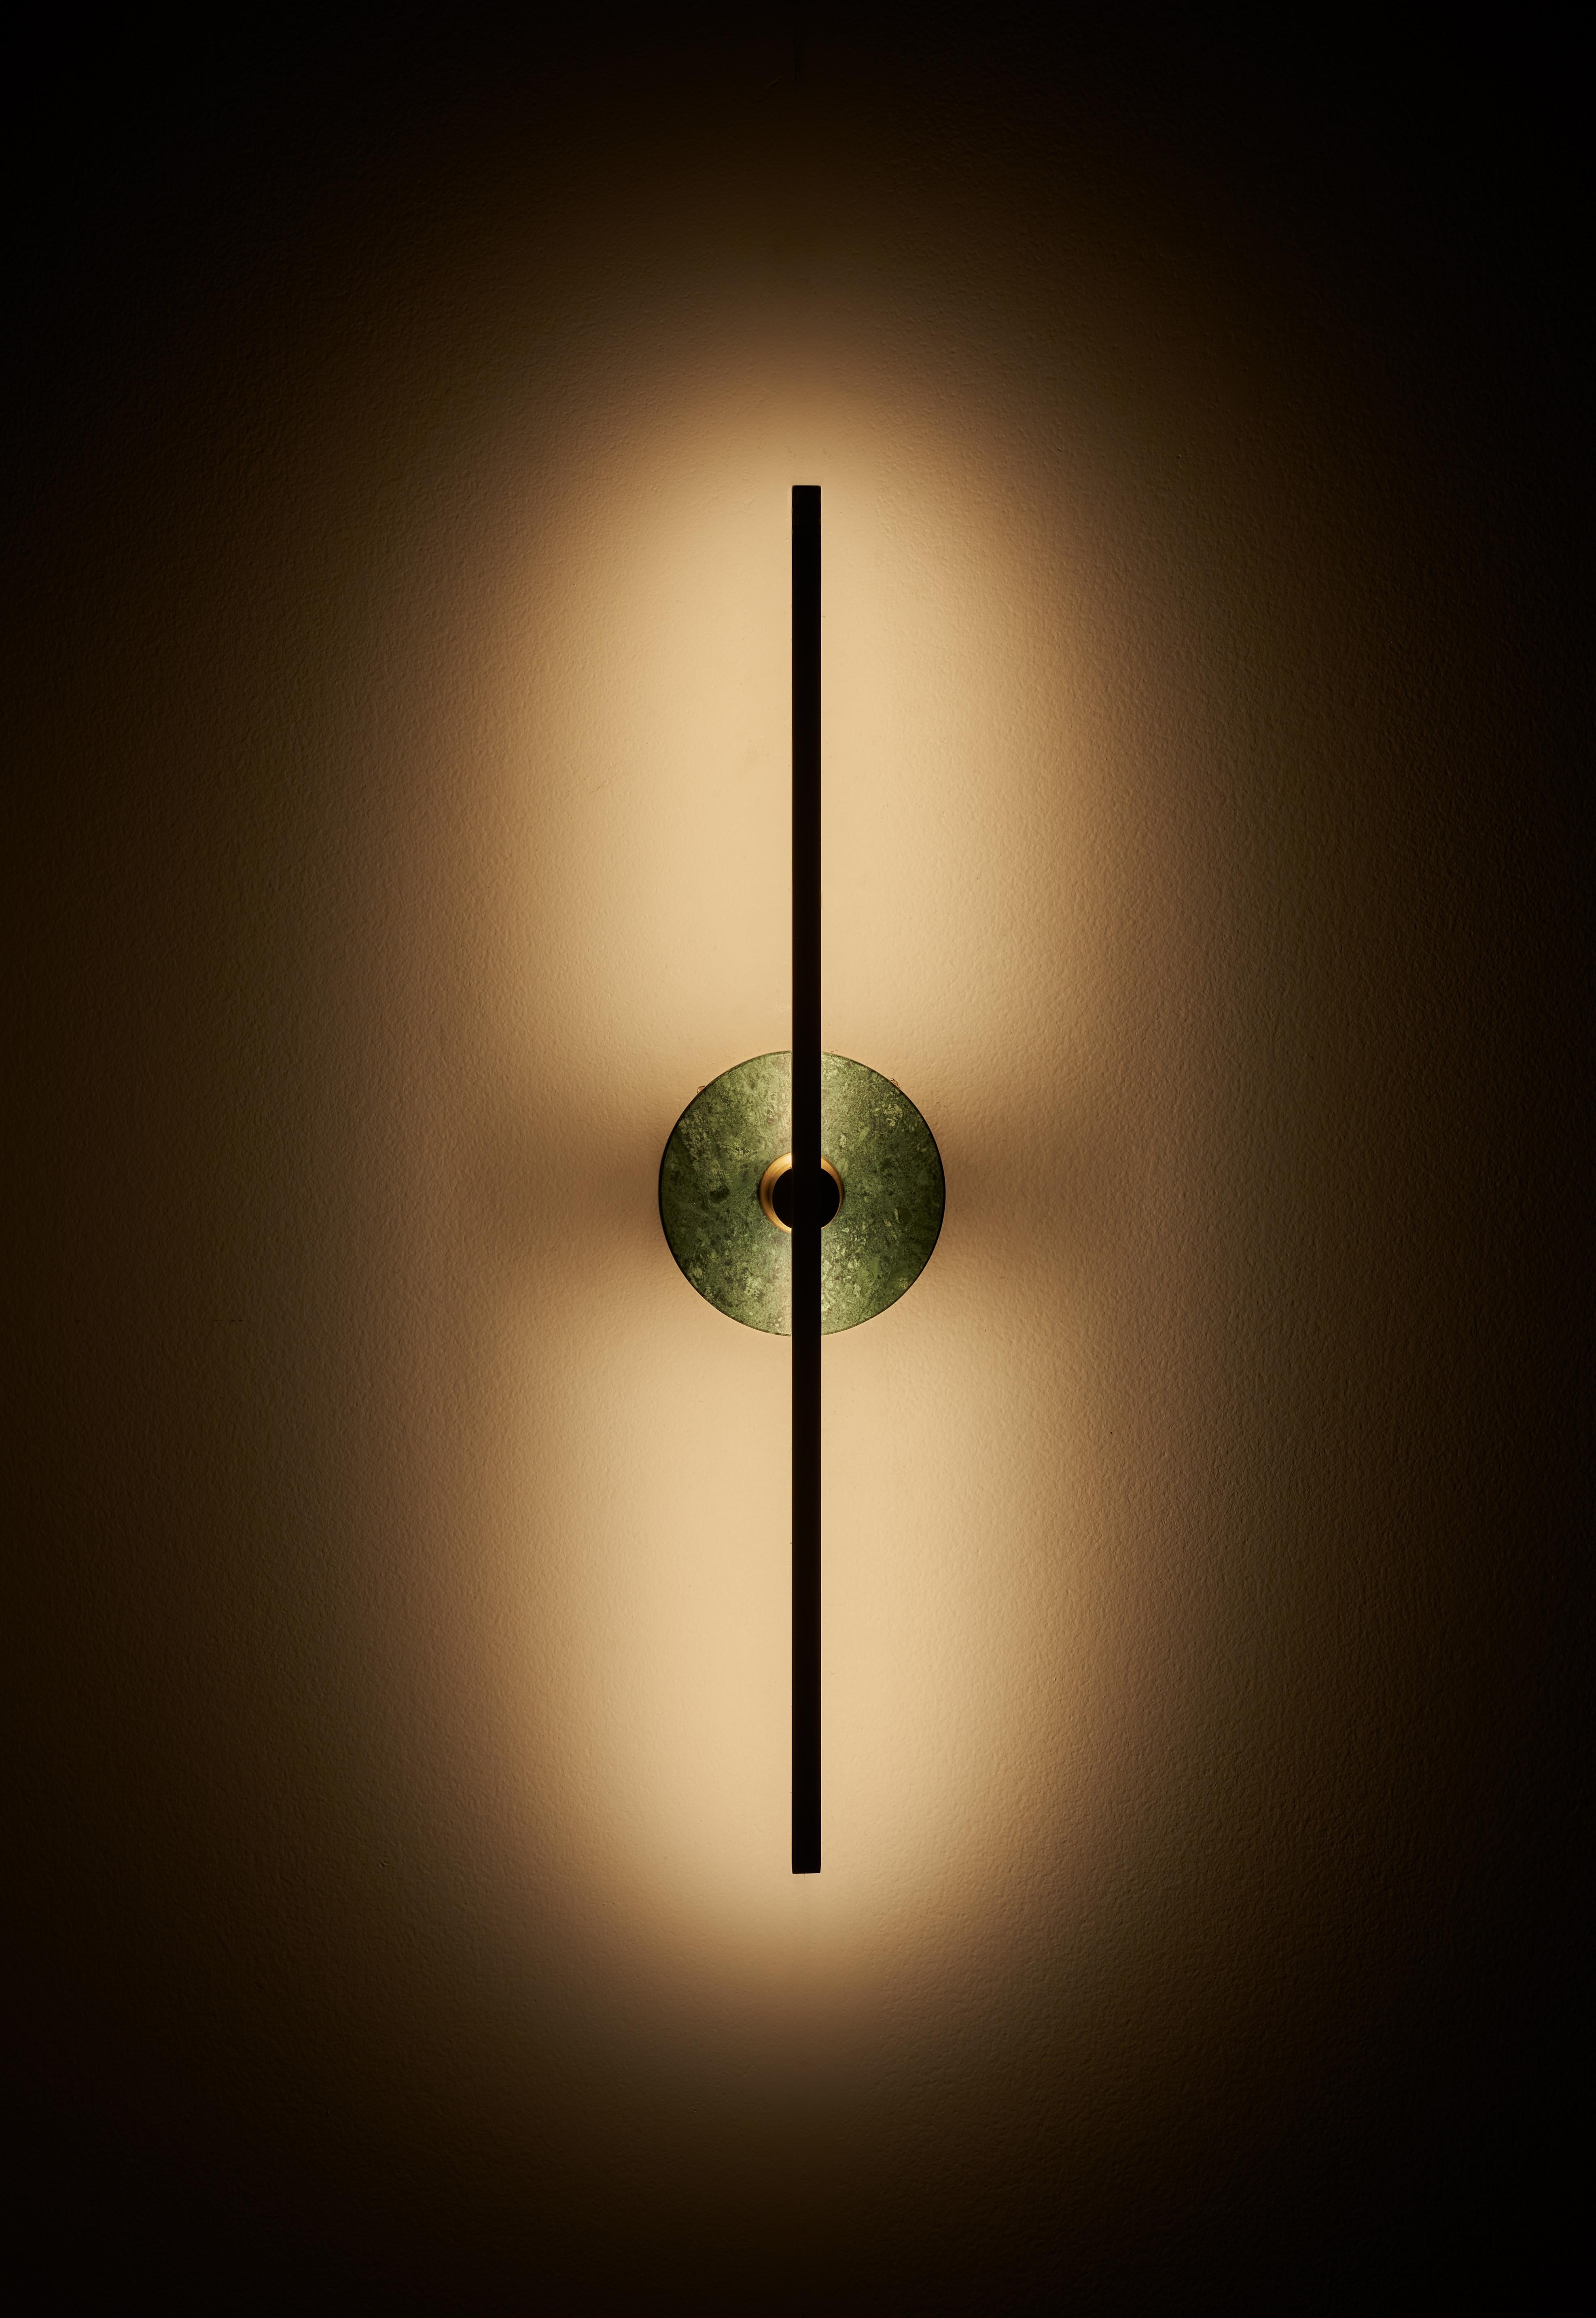 The stick wall sconce is a contemporary lighting fixture that features a Minimalist design with thin brass profiles and advanced LED technology. It emits a warm and diffused light that adds a cozy and inviting atmosphere to any room.

The green